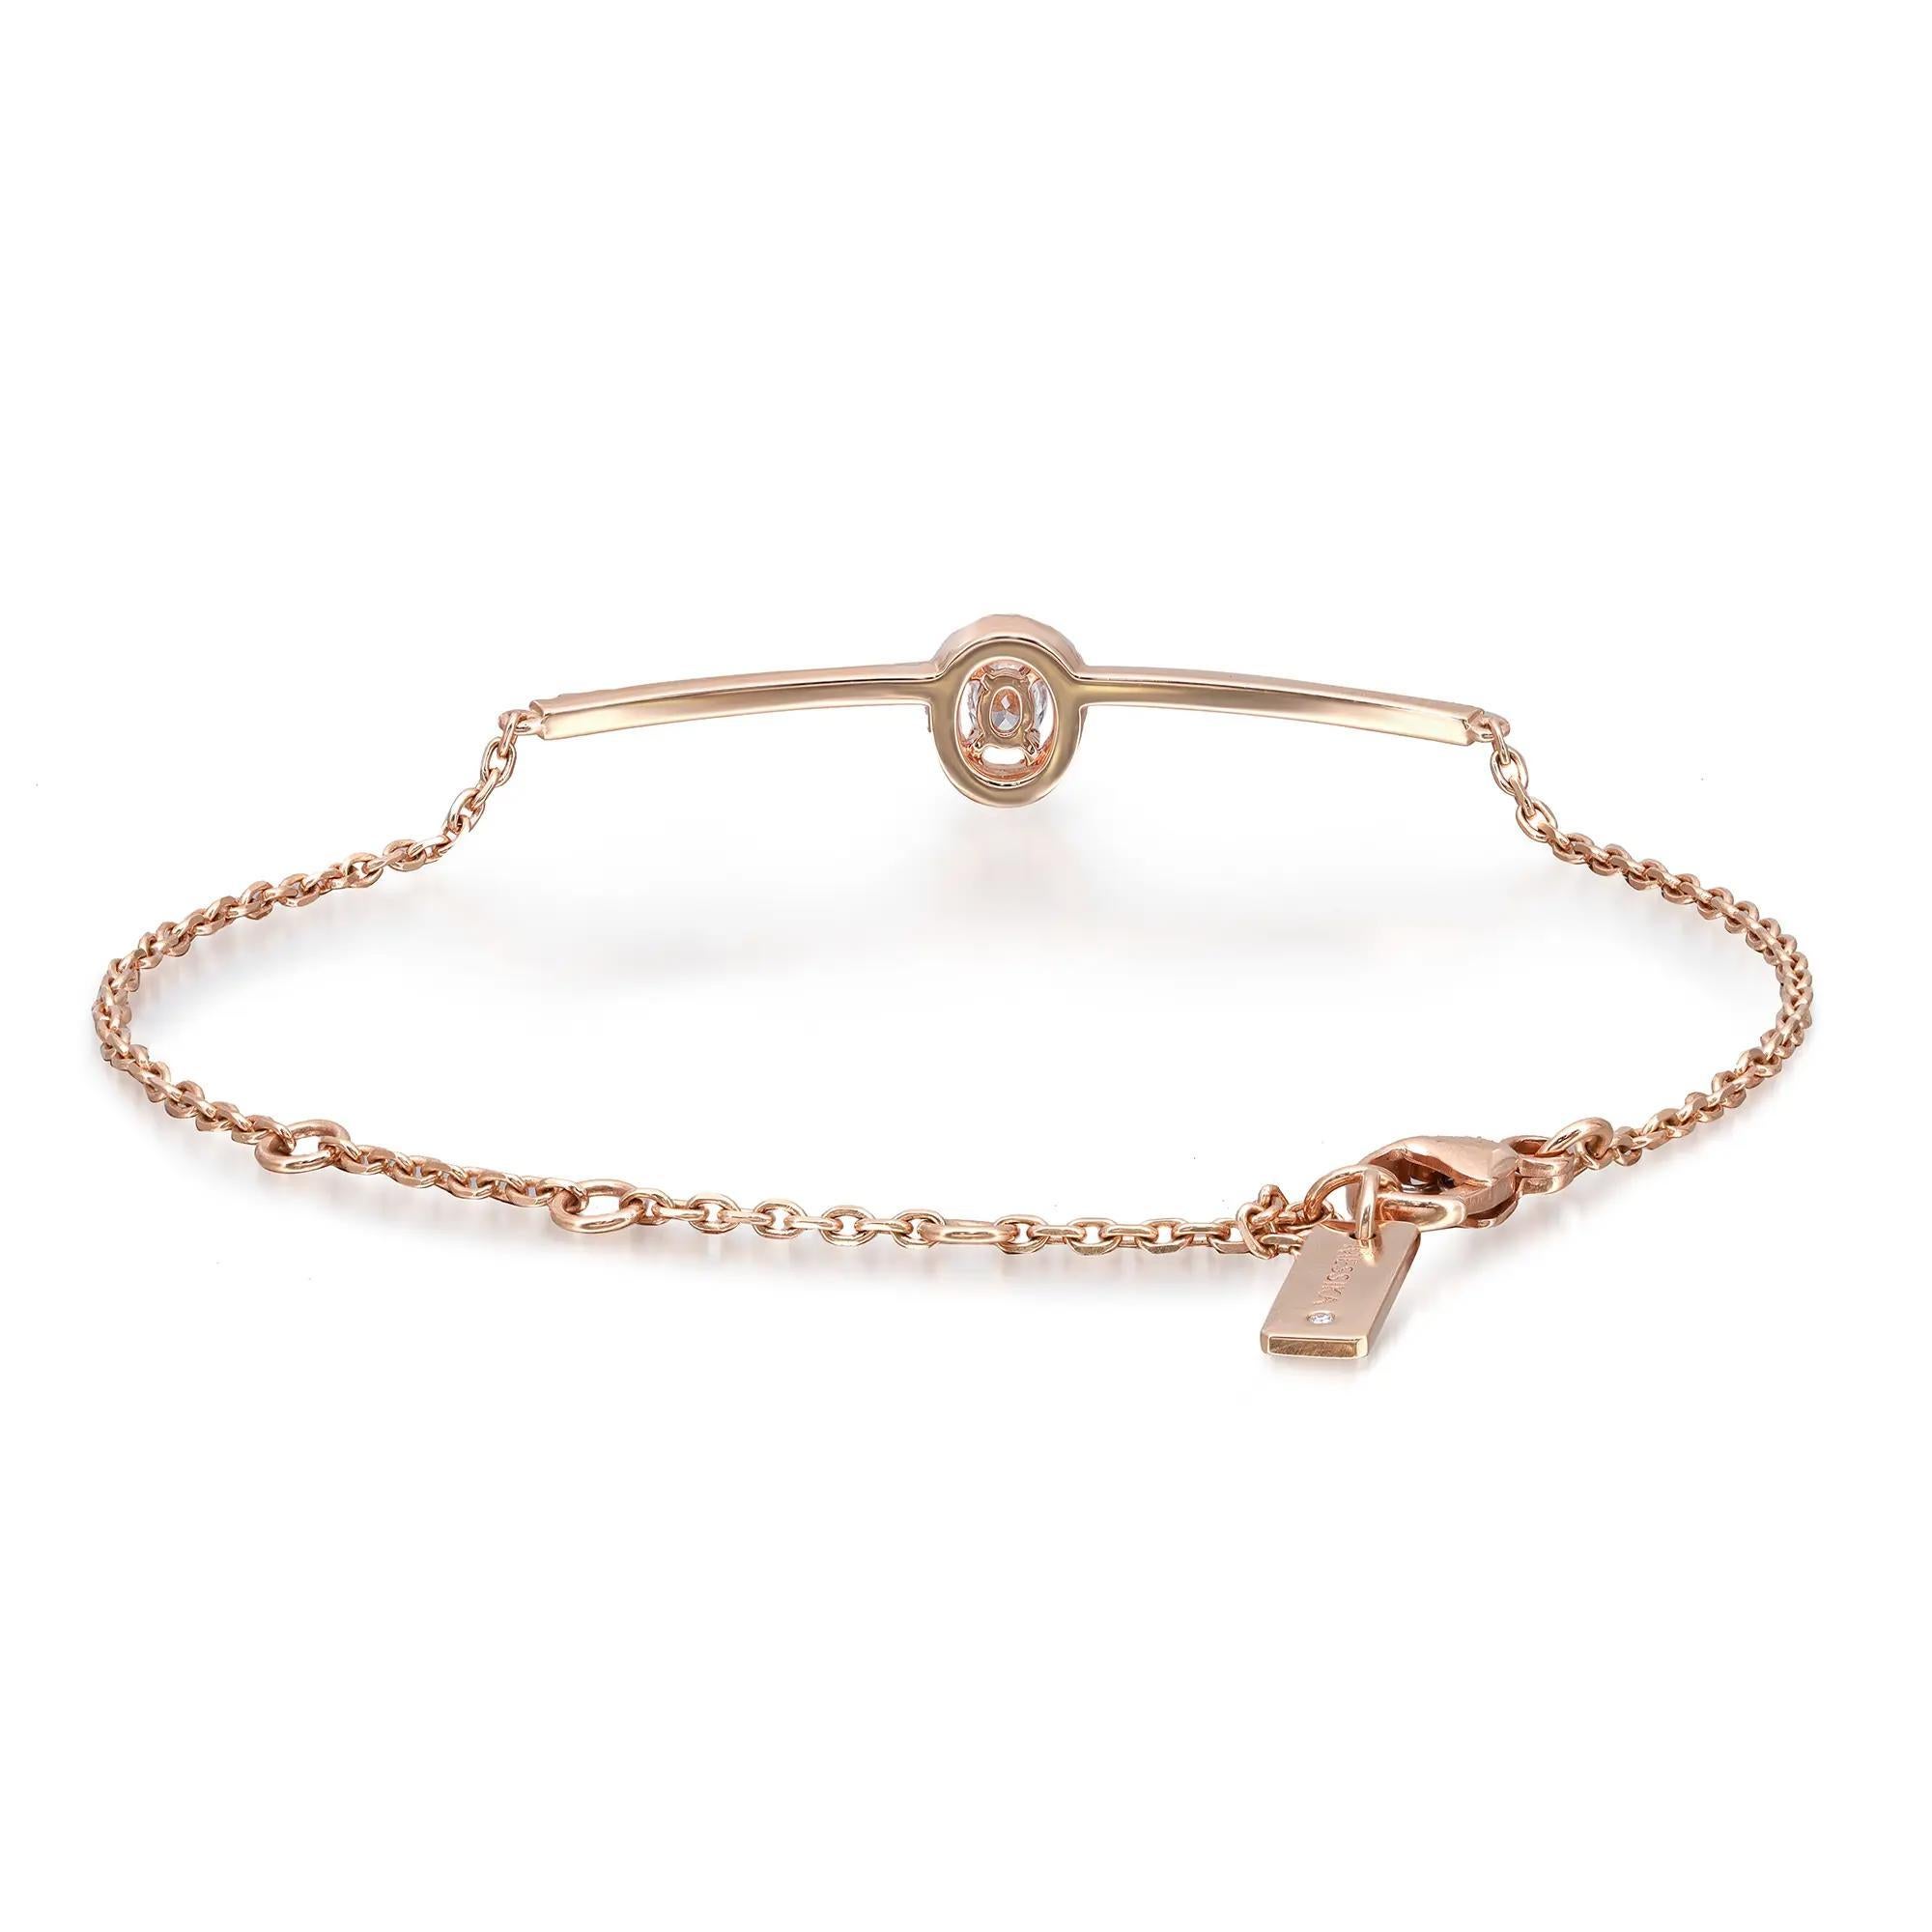 Embrace this elegant Messika Glam'Azone diamond chain bracelet for the perfect everyday look. Crafted in highly polished 18K rose gold. It features prong set oval cut diamond with round cut diamond halo in the center accented with diamonds on both